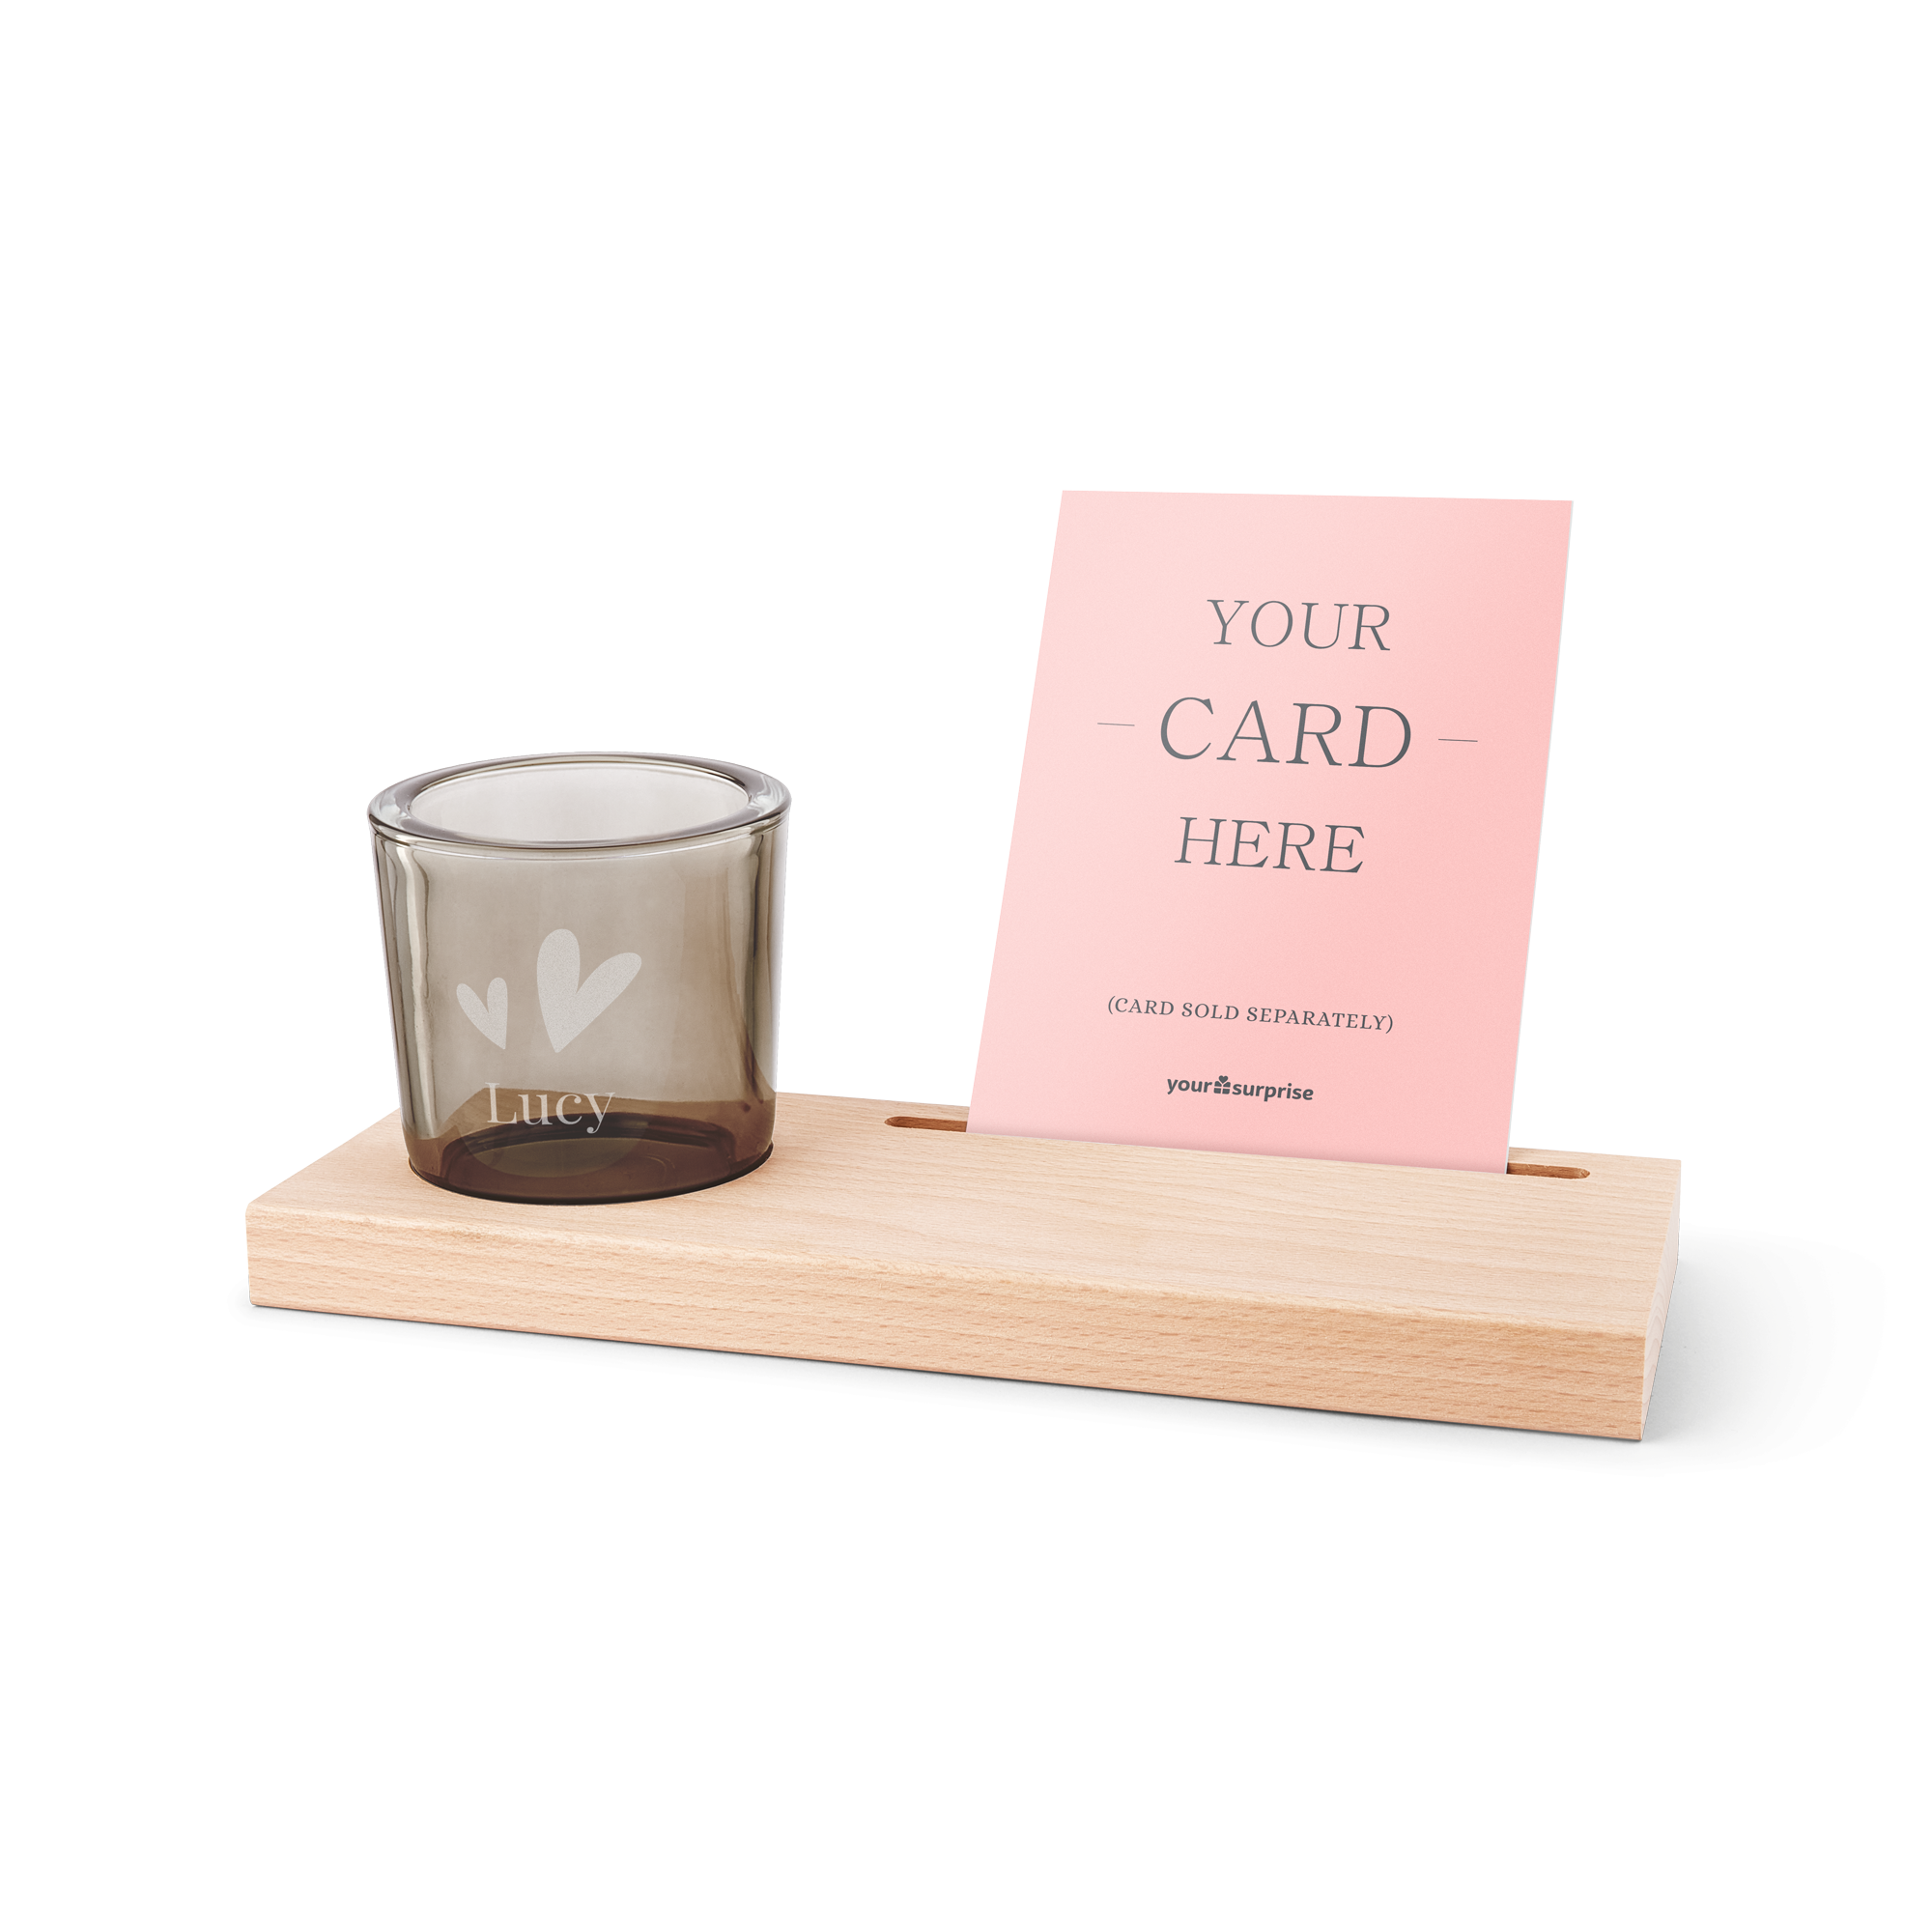 Wooden Cardholder with Glass Candle Holder